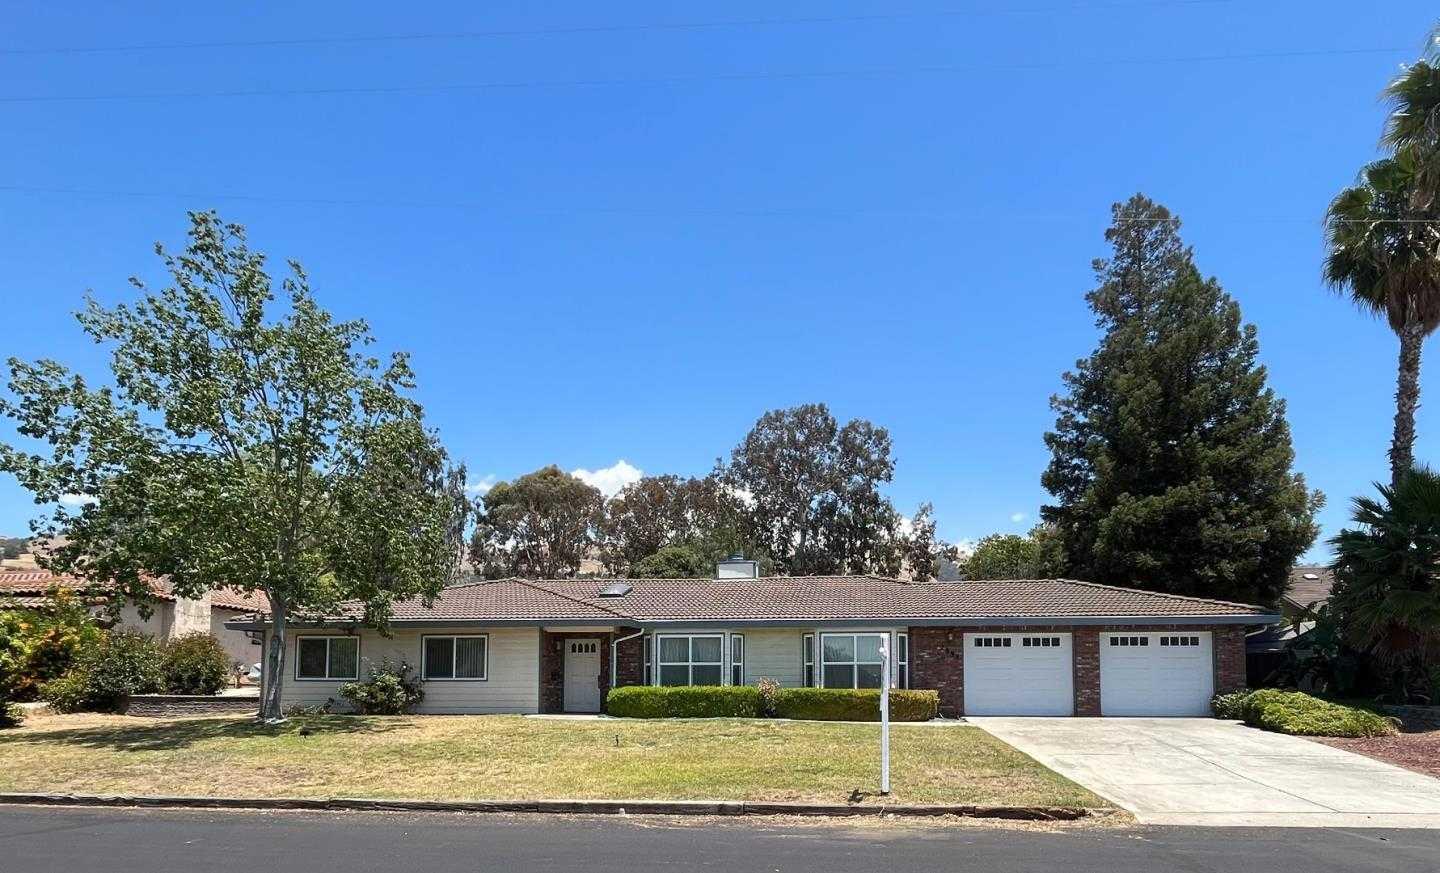 2890 Klein RD, SAN JOSE, Single Family Home,  sold, Realty World - Golden Hills